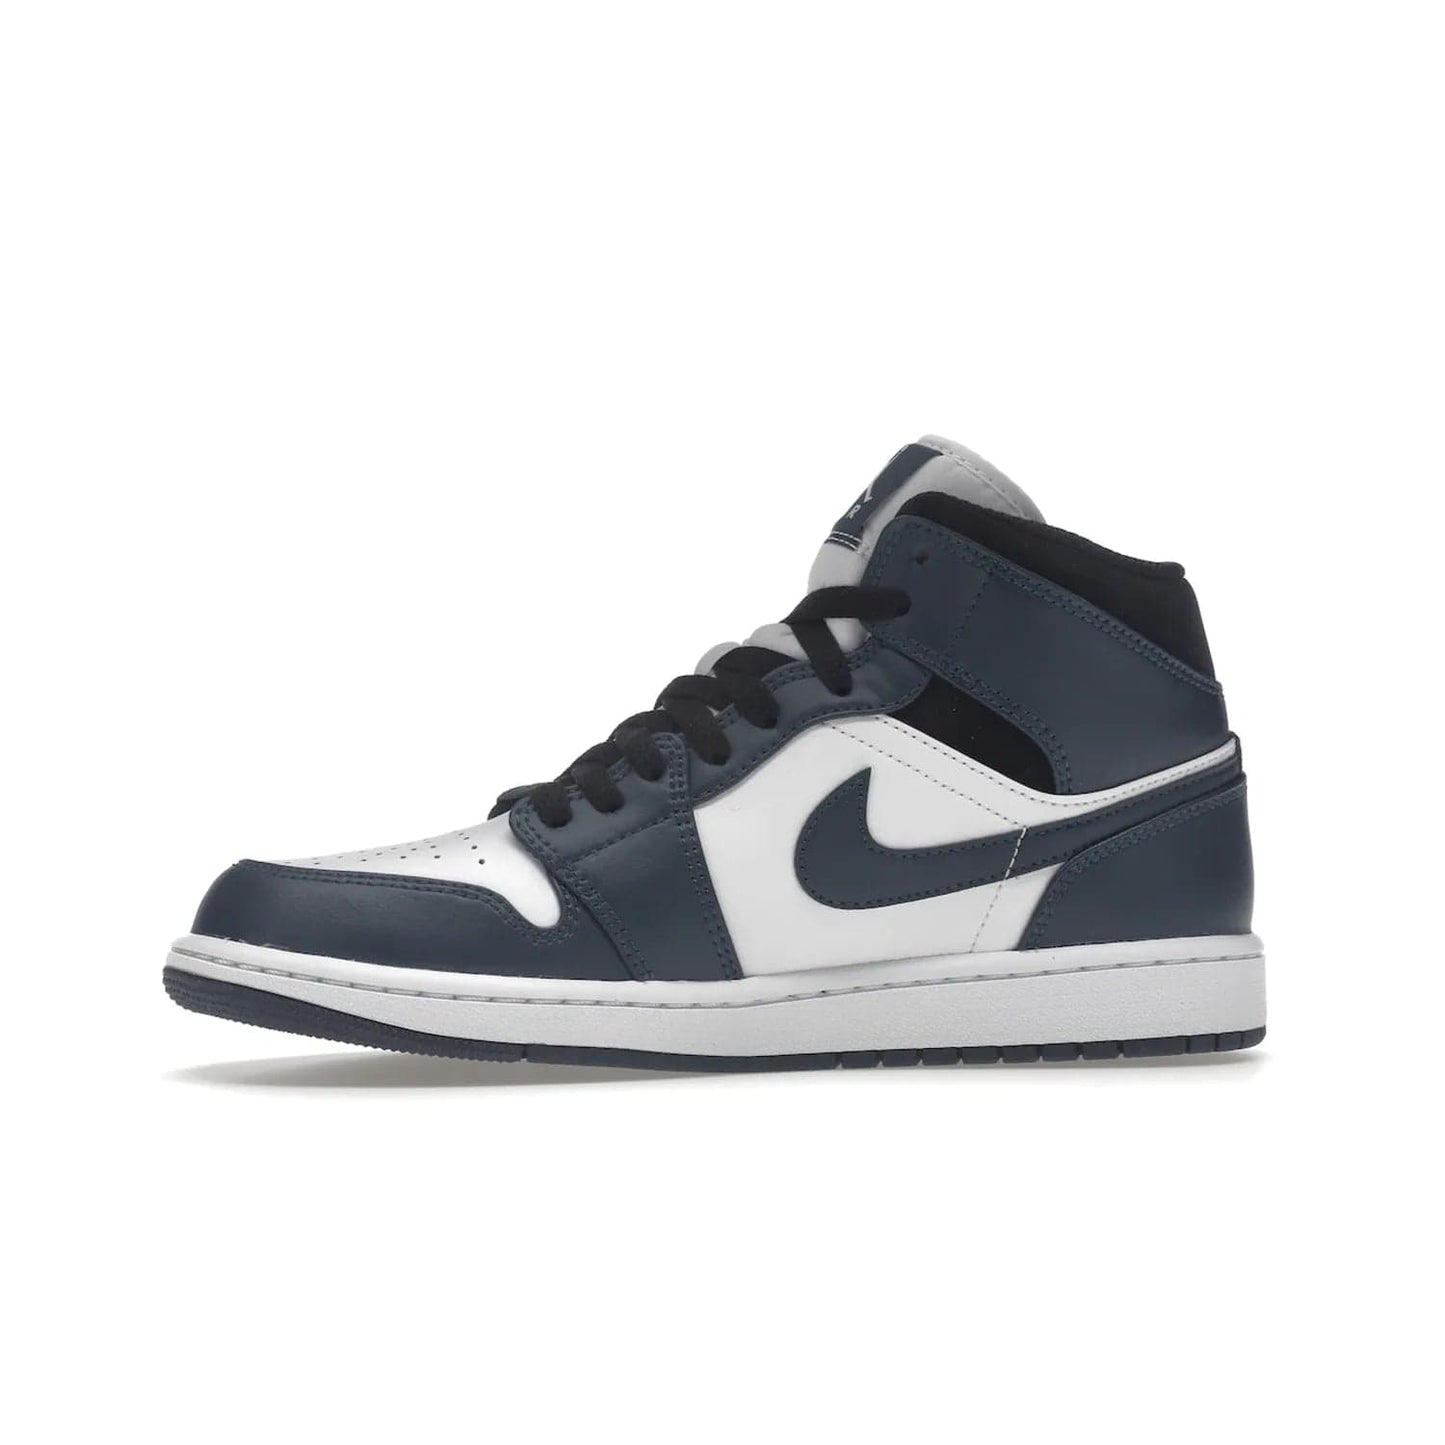 Jordan 1 Mid Armory Navy - Image 18 - Only at www.BallersClubKickz.com - The Jordan 1 Mid Armory Navy: classic basketball sneaker with soft white leather upper, deep navy blue overlays, and black leather ankle detailing. Iconic style with Jordan Wings logo and Jumpman label.